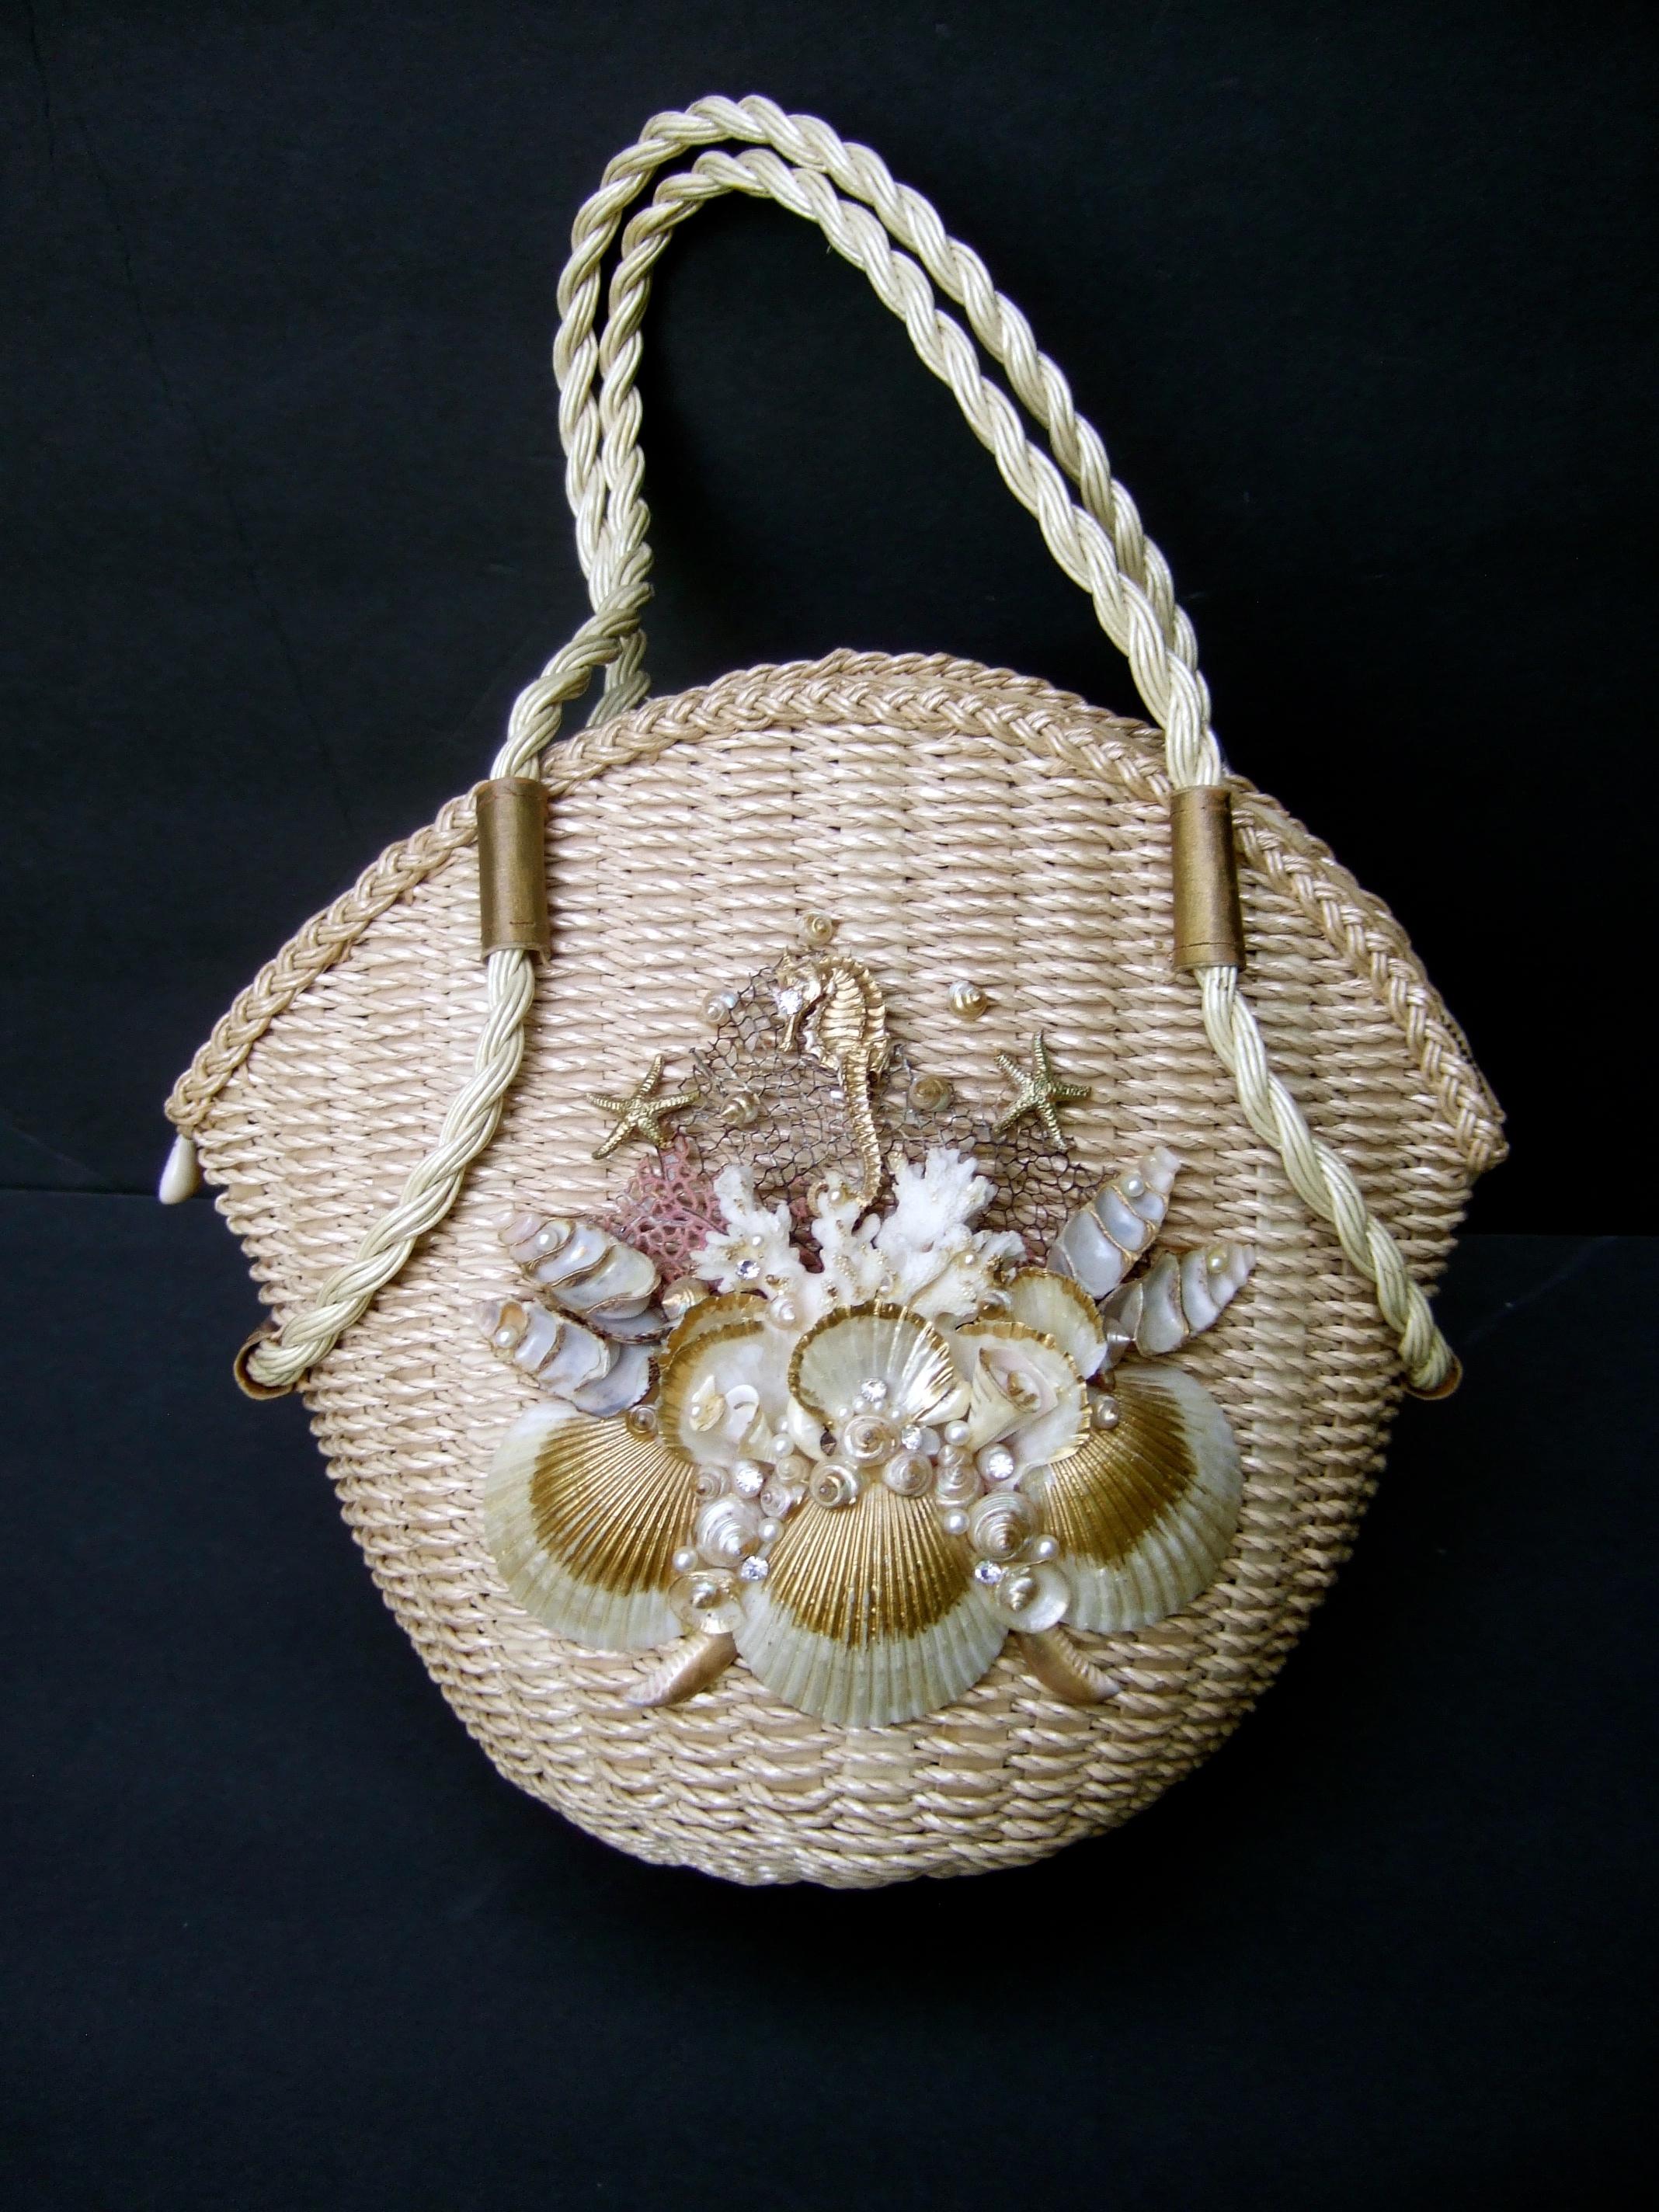 Charming handmade artisan woven wicker rattan rope vintage basket style handbag. Embellished with a cluster of organic sea shells with gold enamel accents; with small resin enamel pearls & small diamante crystals . Carried with a pair of braided